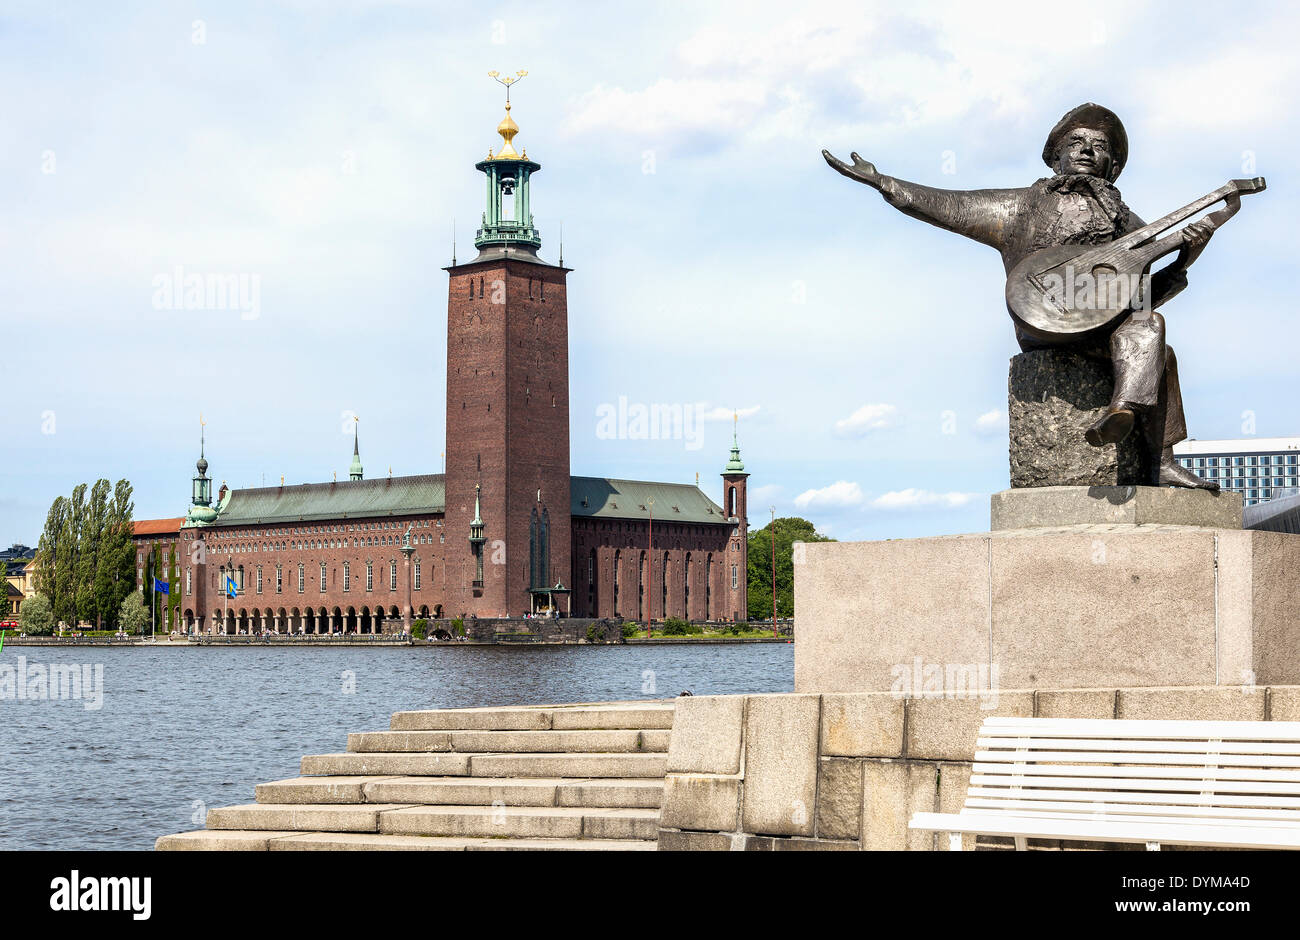 Sculpture of a lute player in front of Stockholm City Hall, Stockholms stadshus, Stockholm, Stockholm County, Sweden Stock Photo